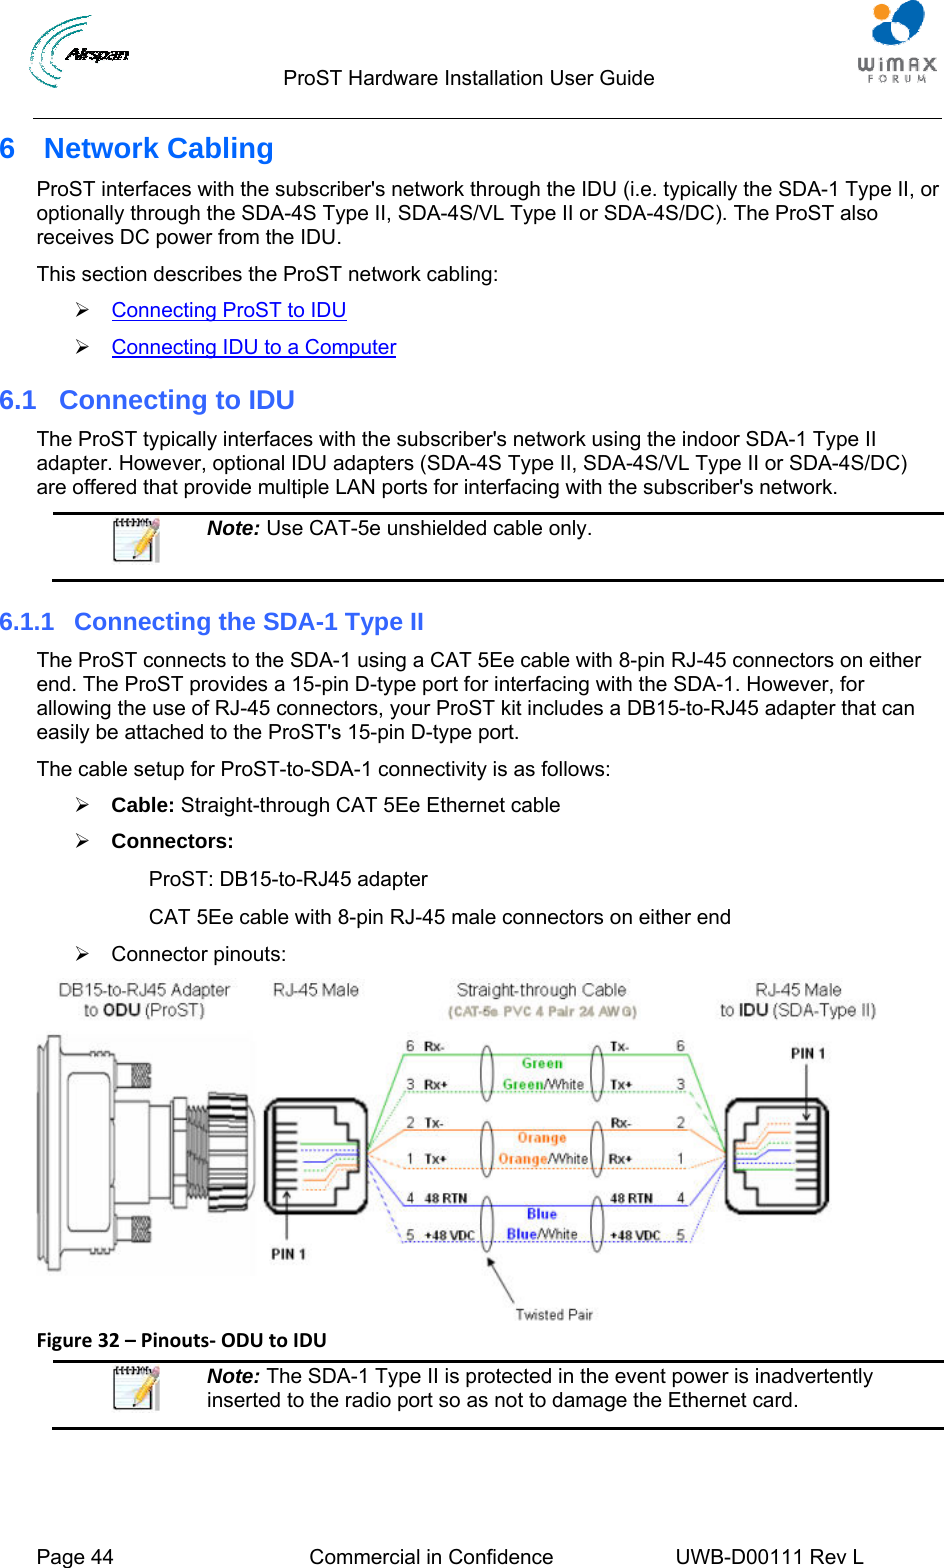                                  ProST Hardware Installation User Guide  Page 44  Commercial in Confidence  UWB-D00111 Rev L   6  Network Cabling ProST interfaces with the subscriber&apos;s network through the IDU (i.e. typically the SDA-1 Type II, or optionally through the SDA-4S Type II, SDA-4S/VL Type II or SDA-4S/DC). The ProST also receives DC power from the IDU.  This section describes the ProST network cabling: ¾ 2Connecting ProST to IDU ¾ 2Connecting IDU to a Computer 6.1  Connecting to IDU The ProST typically interfaces with the subscriber&apos;s network using the indoor SDA-1 Type II adapter. However, optional IDU adapters (SDA-4S Type II, SDA-4S/VL Type II or SDA-4S/DC) are offered that provide multiple LAN ports for interfacing with the subscriber&apos;s network.   Note: Use CAT-5e unshielded cable only. 6.1.1  Connecting the SDA-1 Type II The ProST connects to the SDA-1 using a CAT 5Ee cable with 8-pin RJ-45 connectors on either end. The ProST provides a 15-pin D-type port for interfacing with the SDA-1. However, for allowing the use of RJ-45 connectors, your ProST kit includes a DB15-to-RJ45 adapter that can easily be attached to the ProST&apos;s 15-pin D-type port. The cable setup for ProST-to-SDA-1 connectivity is as follows: ¾ Cable: Straight-through CAT 5Ee Ethernet cable ¾ Connectors:     ProST: DB15-to-RJ45 adapter    CAT 5Ee cable with 8-pin RJ-45 male connectors on either end ¾ Connector pinouts:  Figure32–Pinouts‐ODUtoIDU Note: The SDA-1 Type II is protected in the event power is inadvertently inserted to the radio port so as not to damage the Ethernet card.  